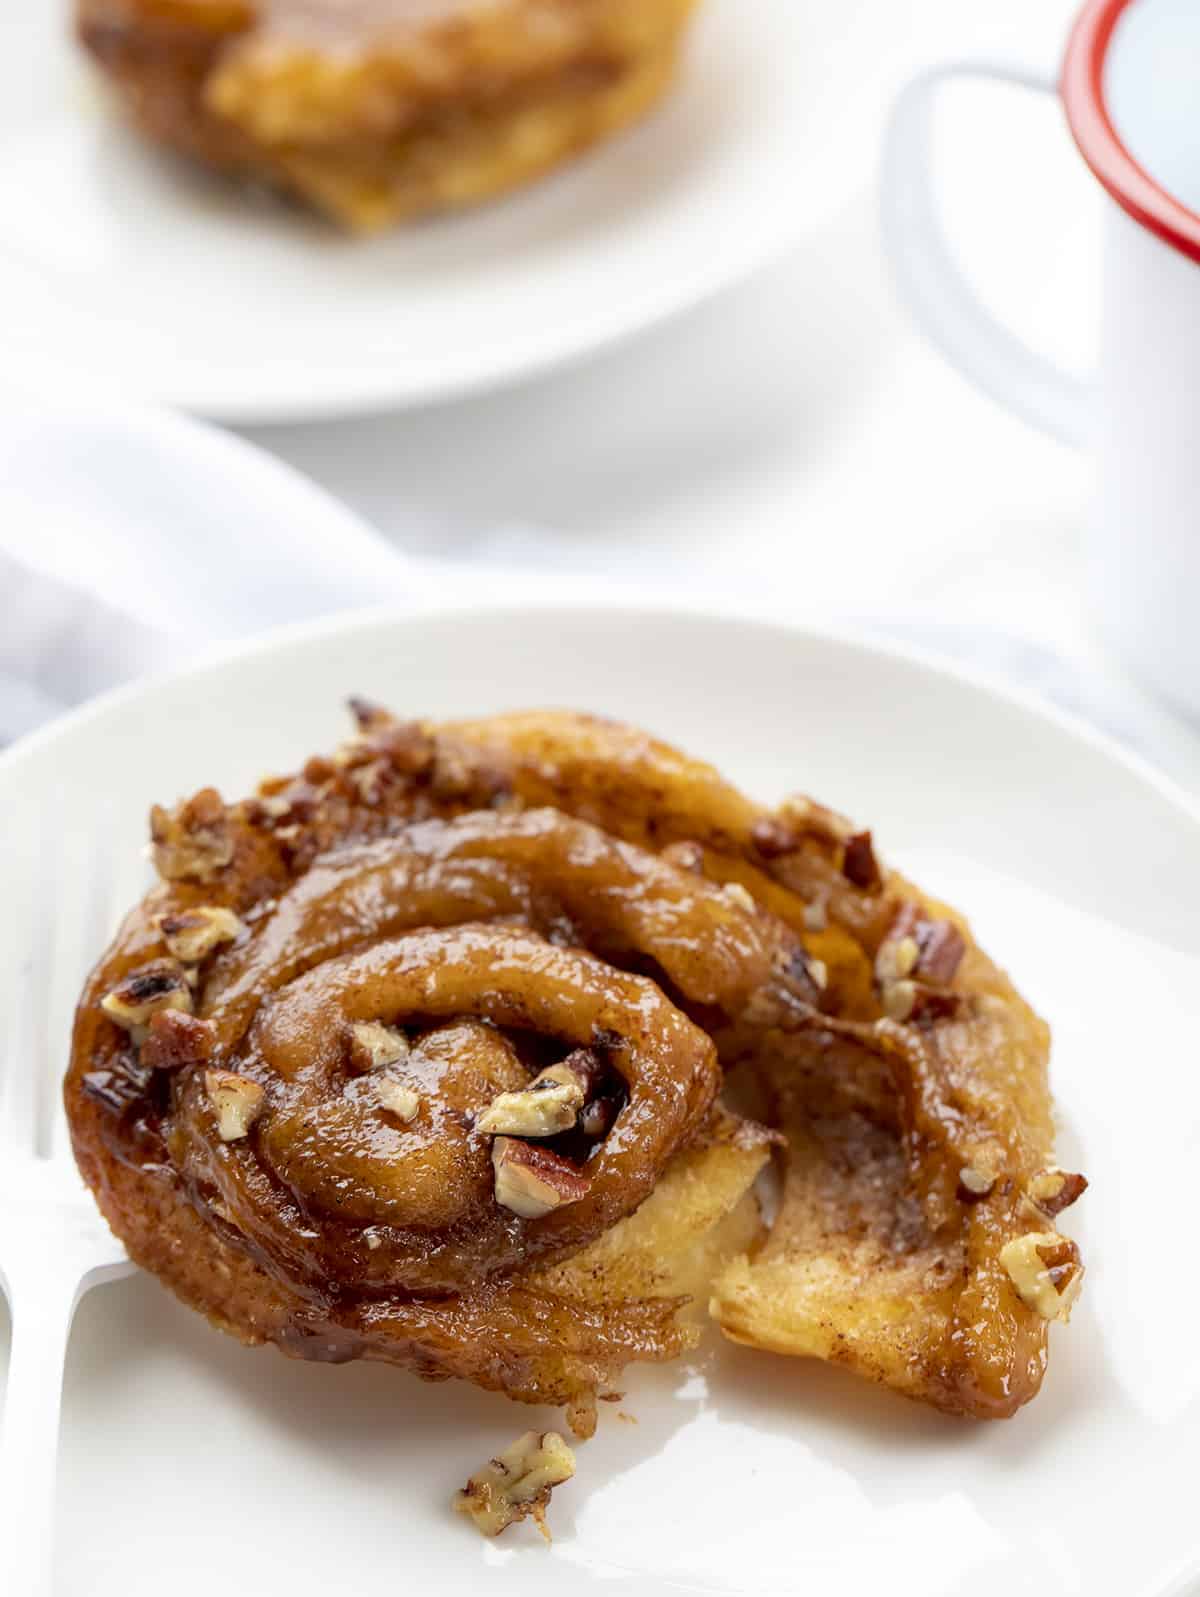 One Sticky Bun on a White Plate Slightly Unrolled